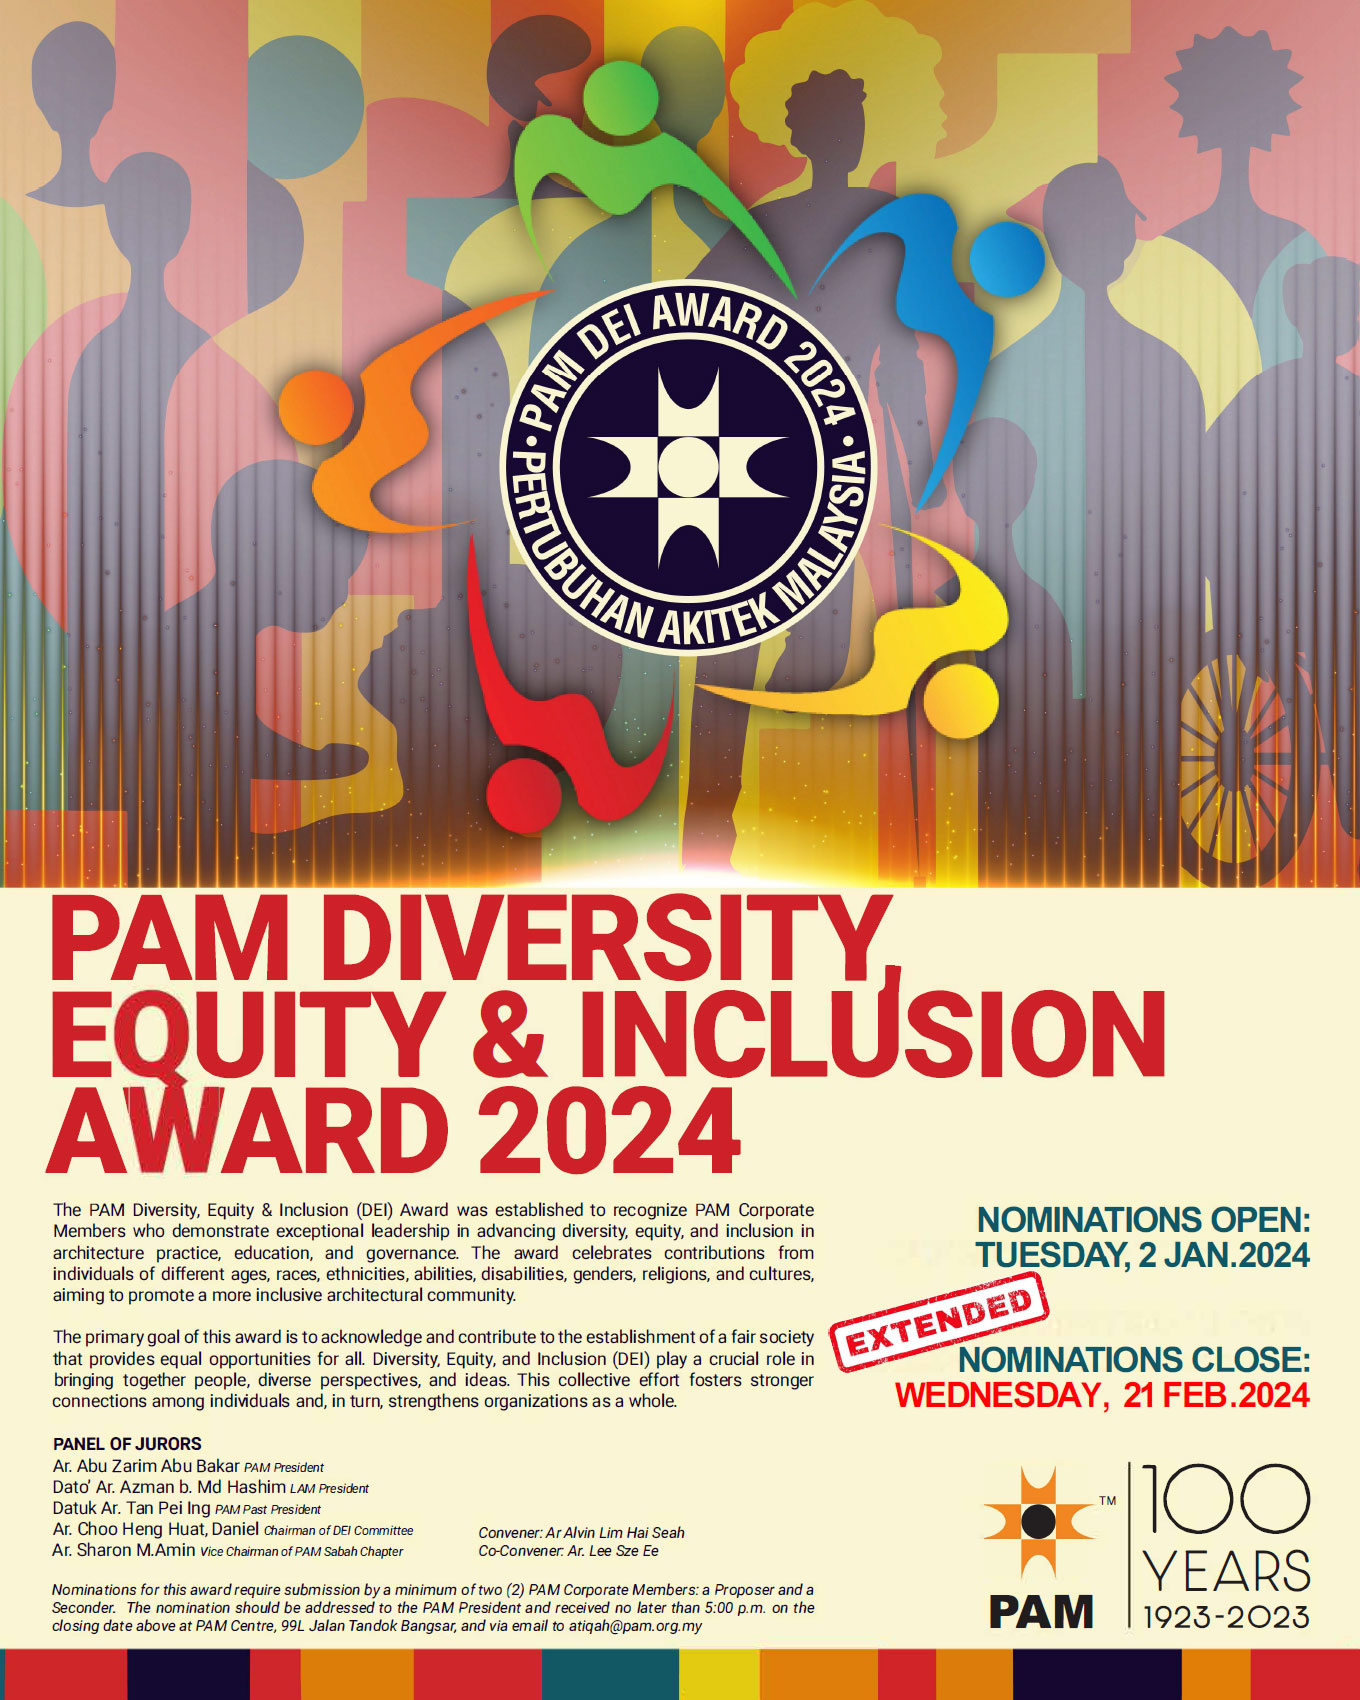 PAM Diversity, Equity & Inclusion (DEI) Award 2024